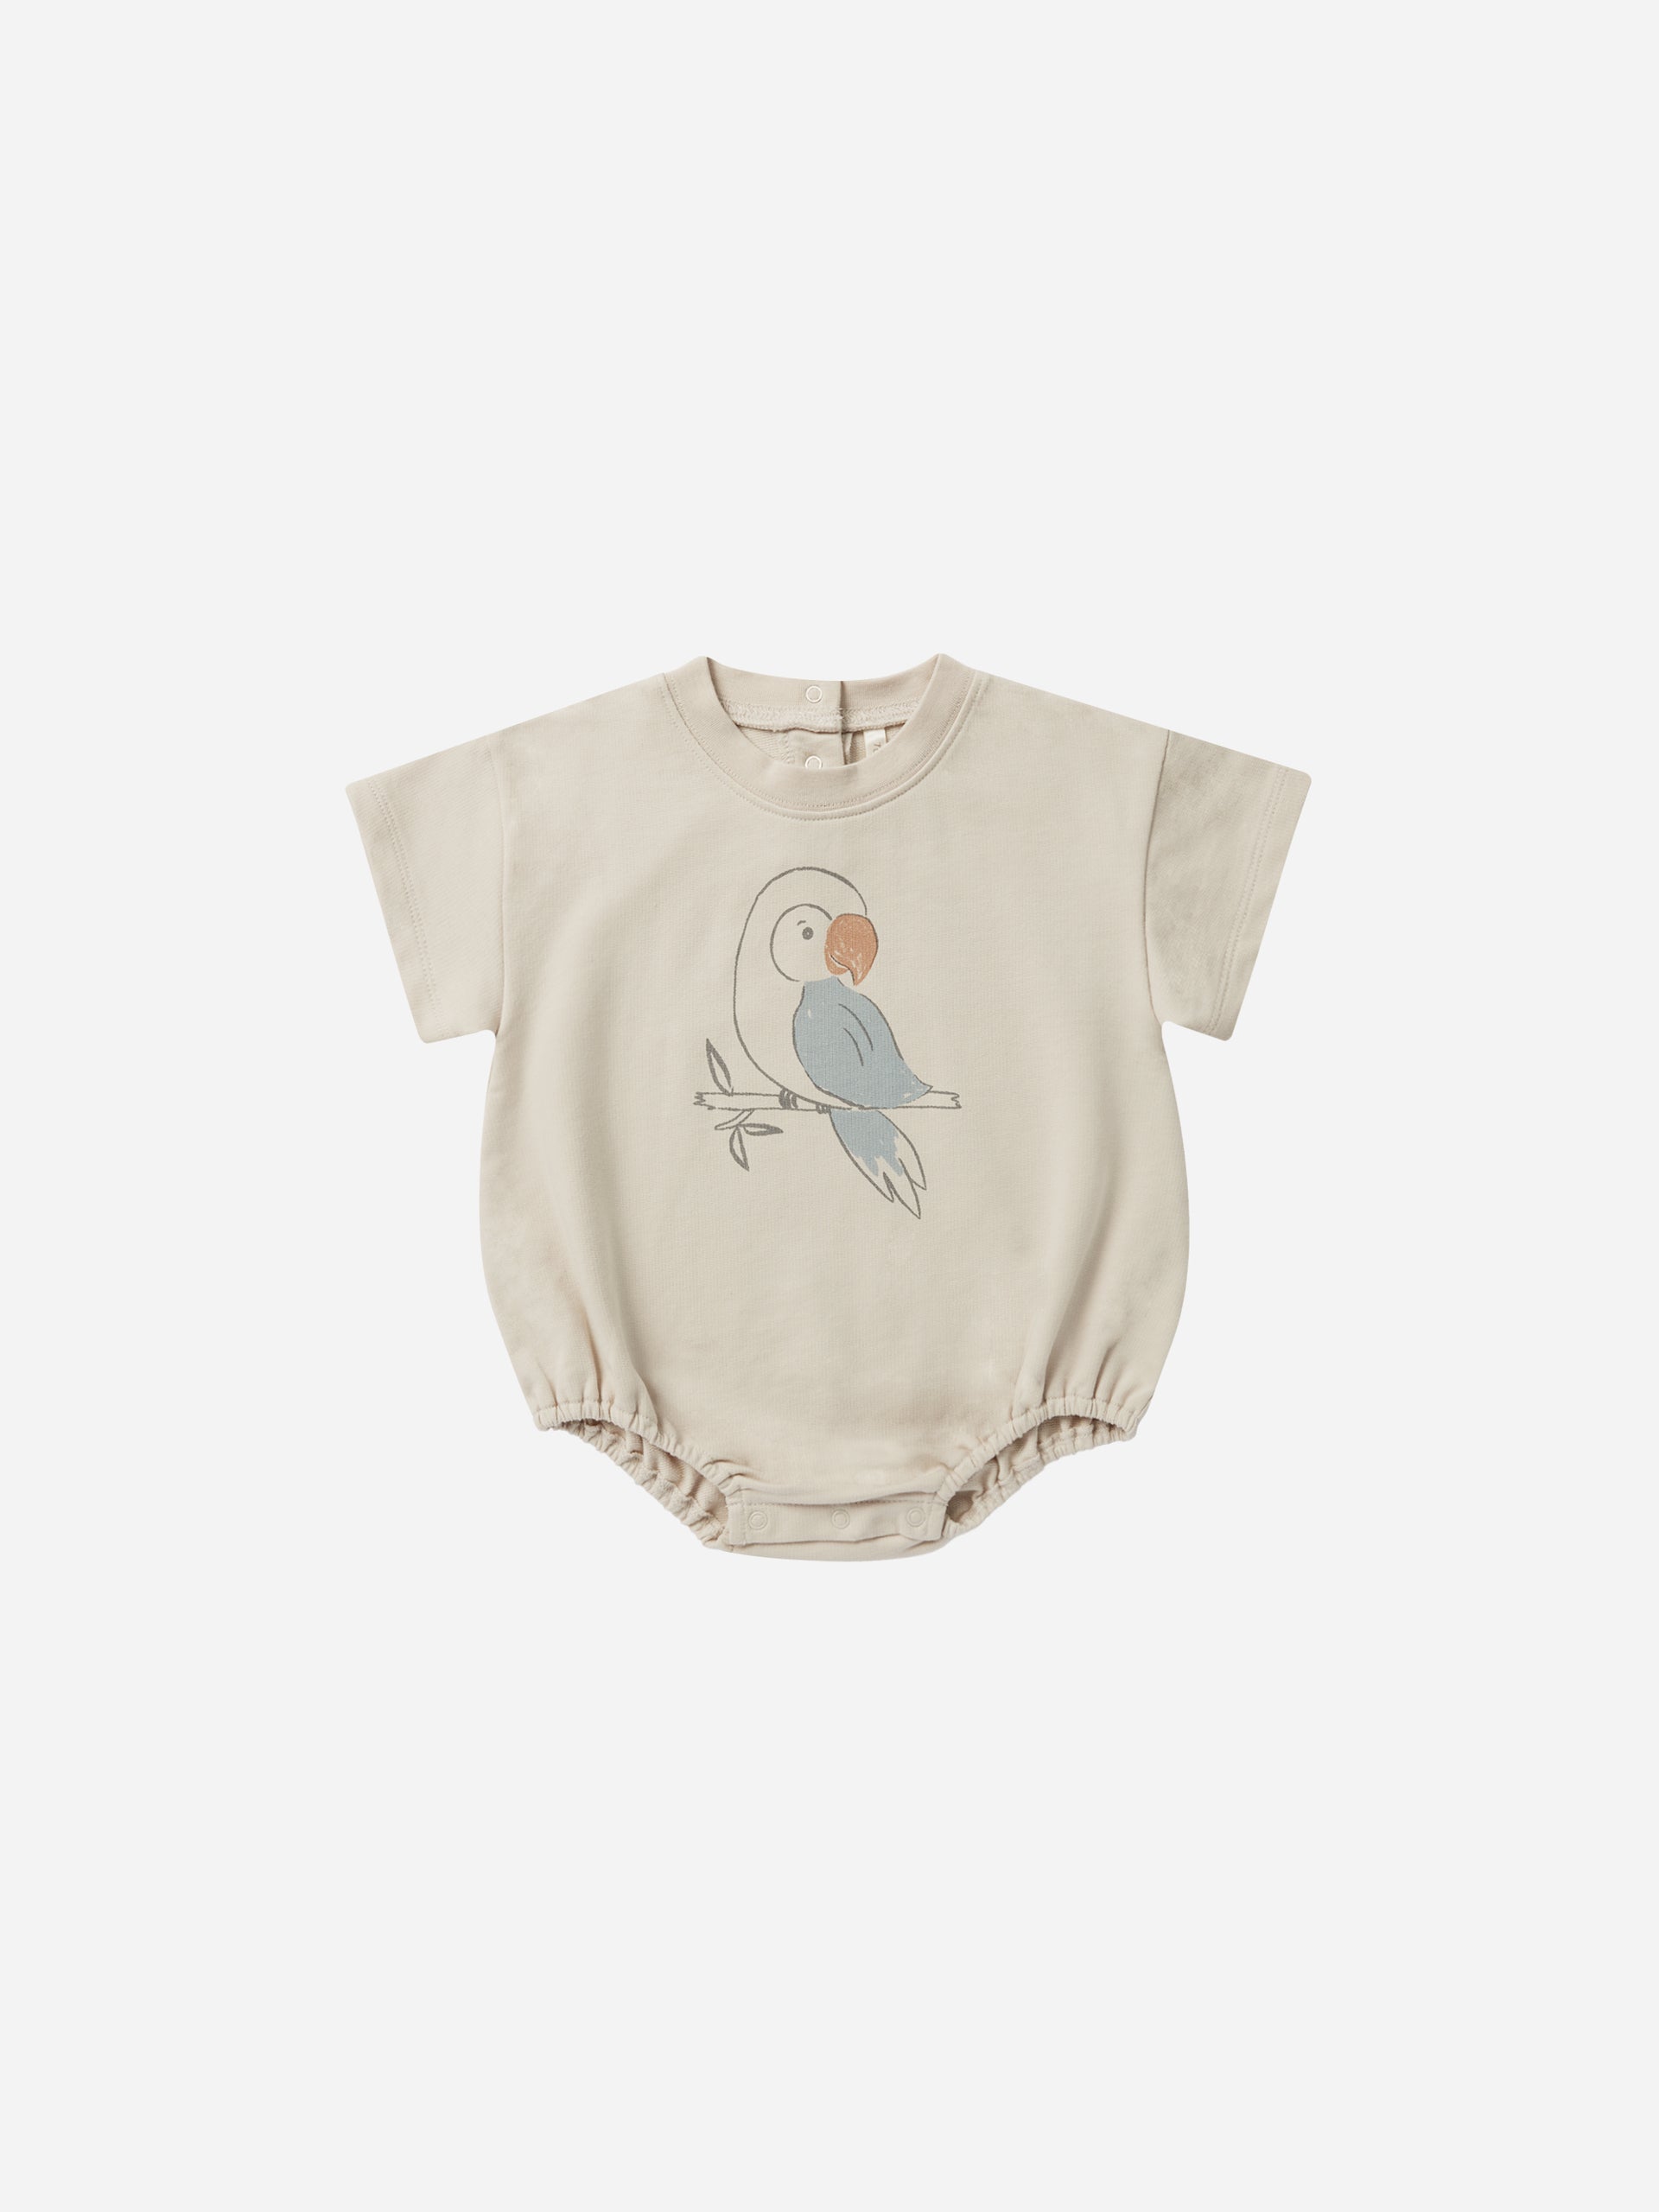 Relaxed Bubble Romper || Parrot - Rylee + Cru | Kids Clothes | Trendy Baby Clothes | Modern Infant Outfits |